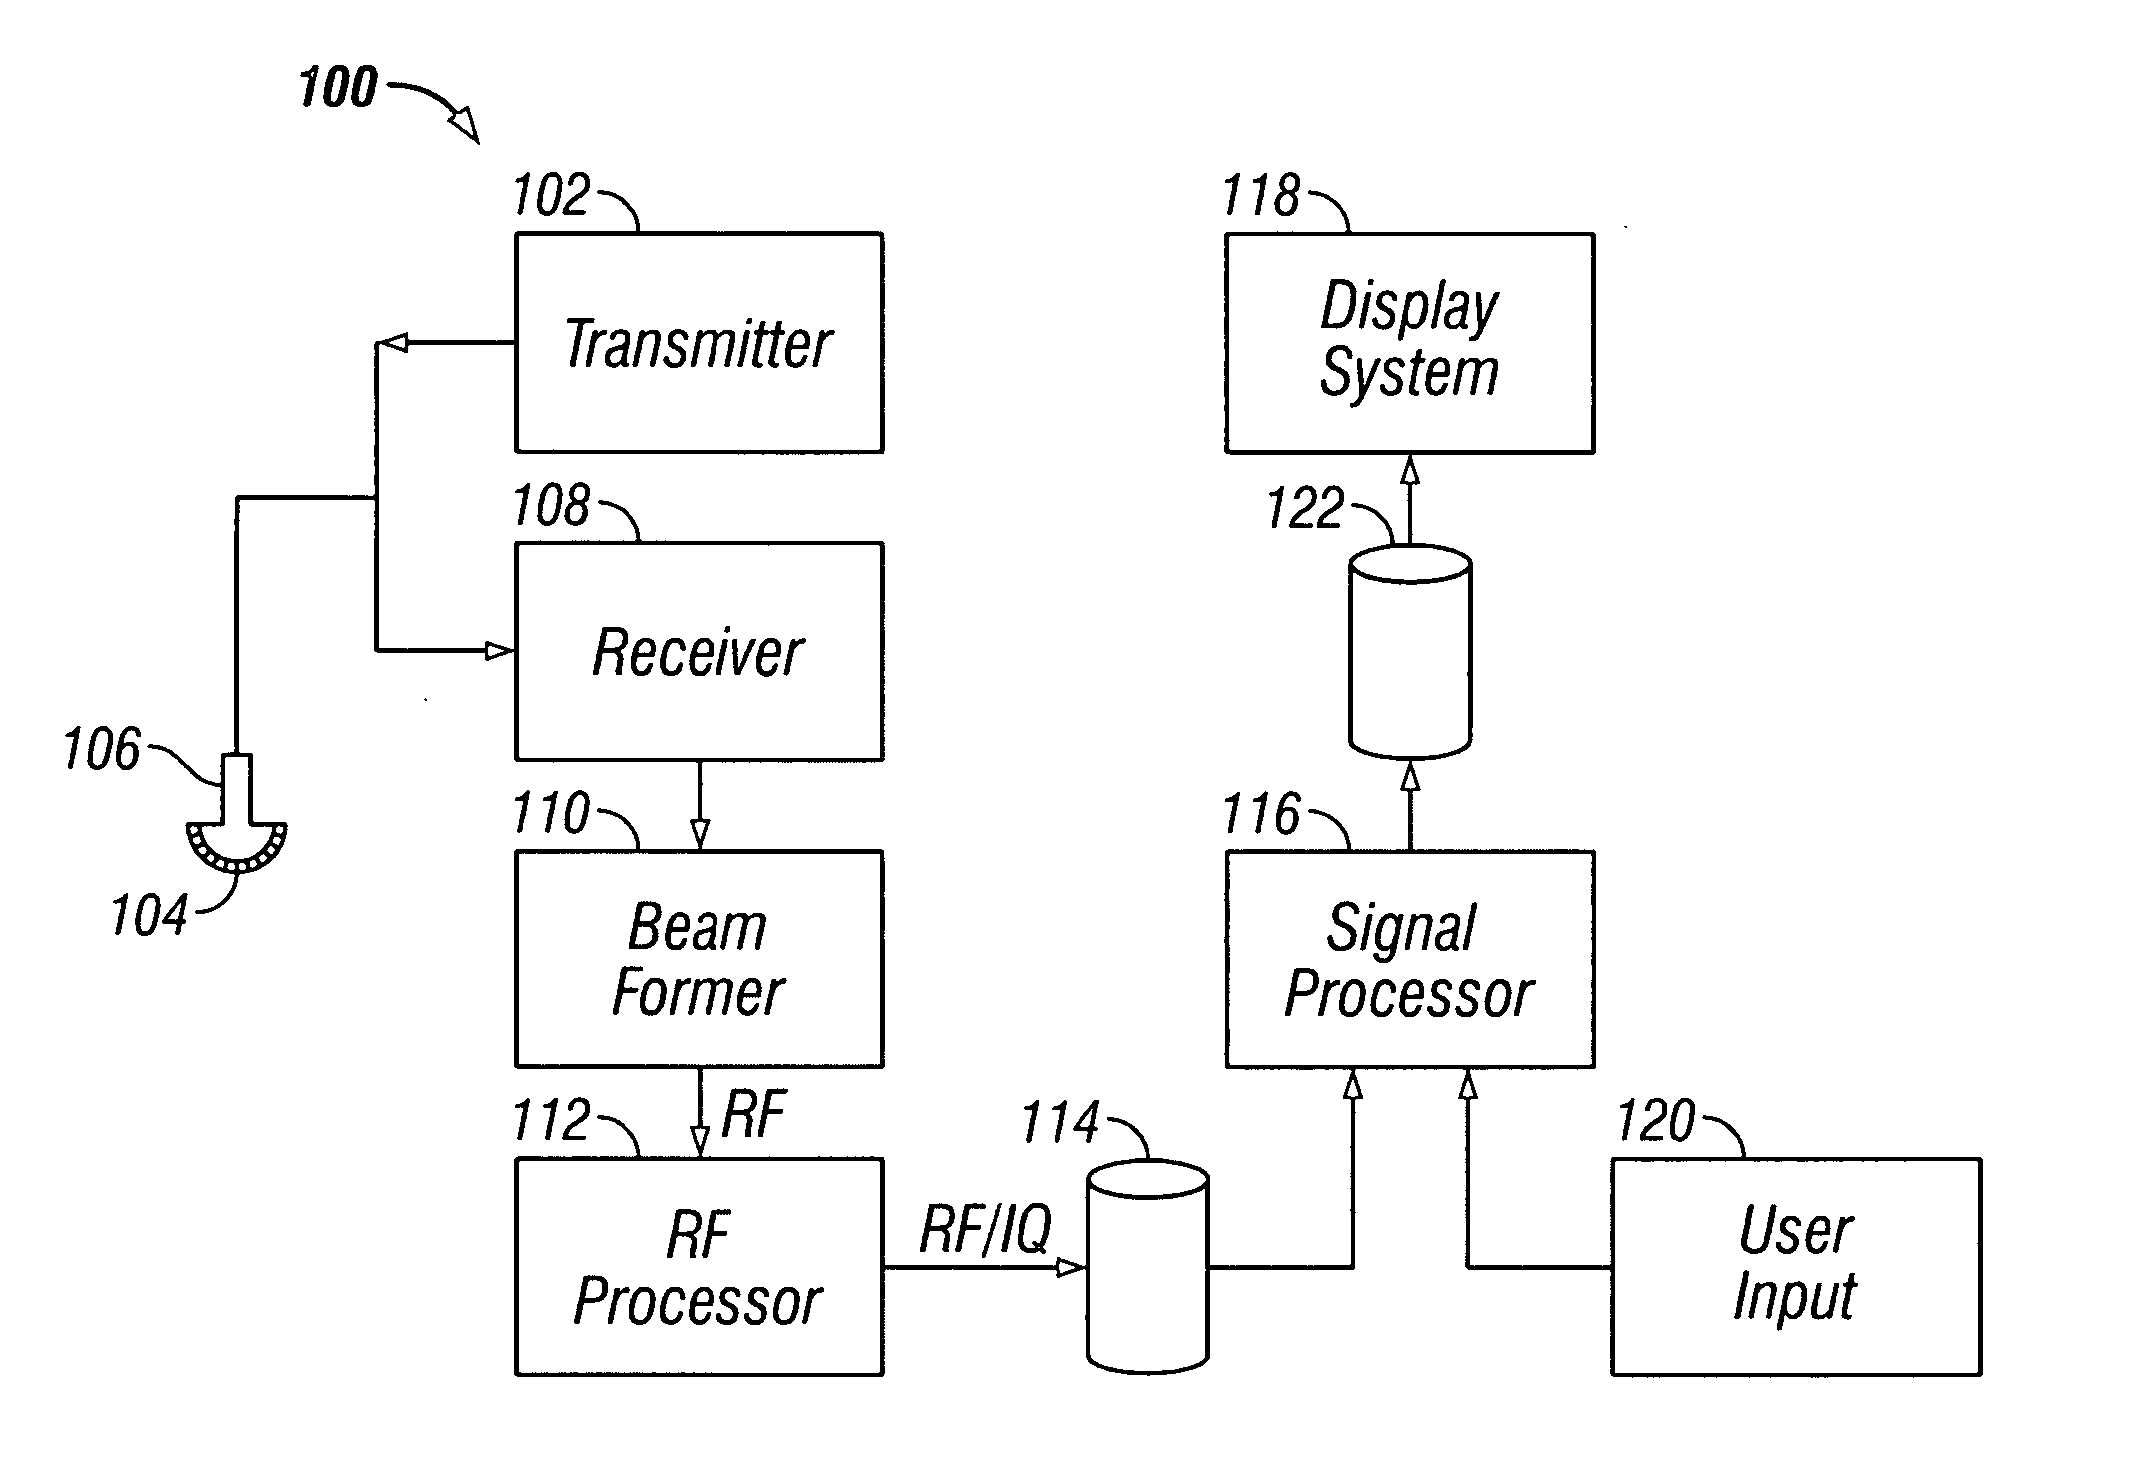 Method and apparatus for C-plane volume compound imaging